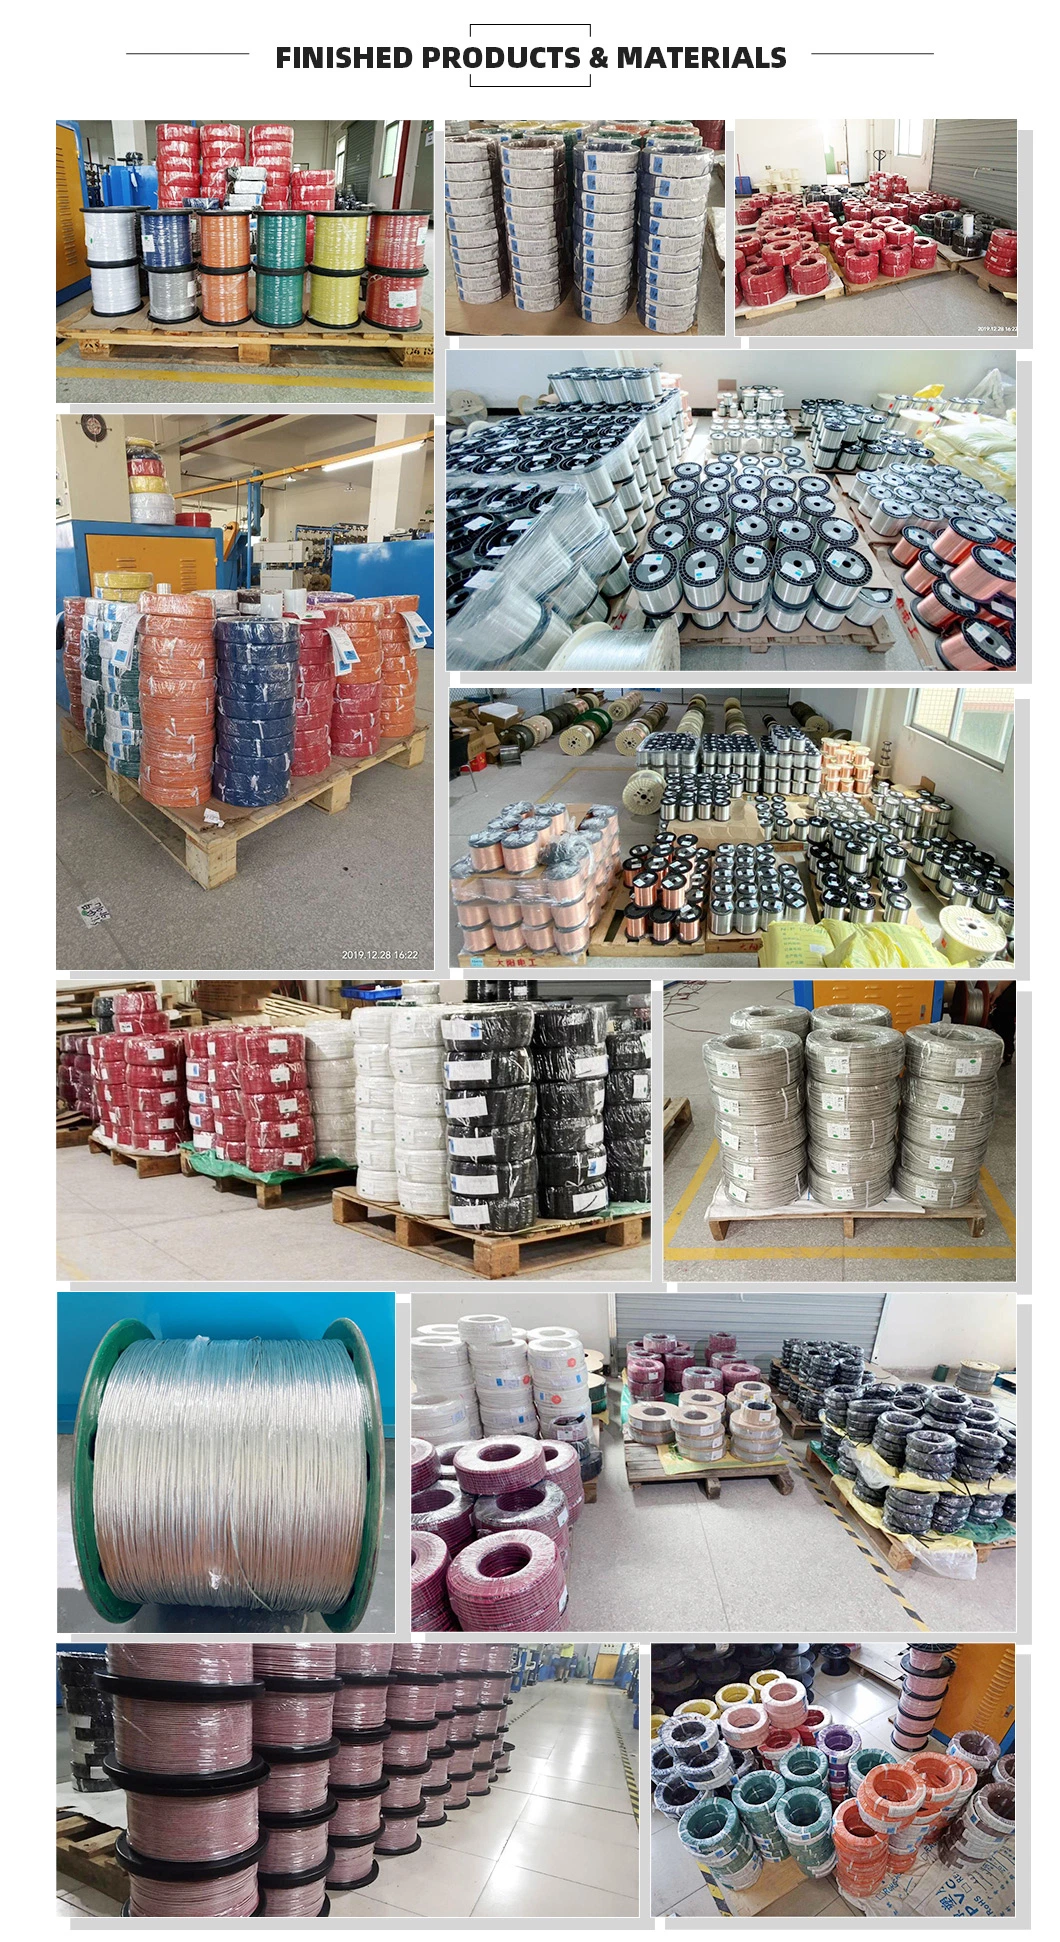 PVC Insulated House Wiring Copper Wire Electrical Wiring 1.5mm /2.5mm /4mm /6mm/ 10mm /16mm /25mm Made in China Factory Manufacturer